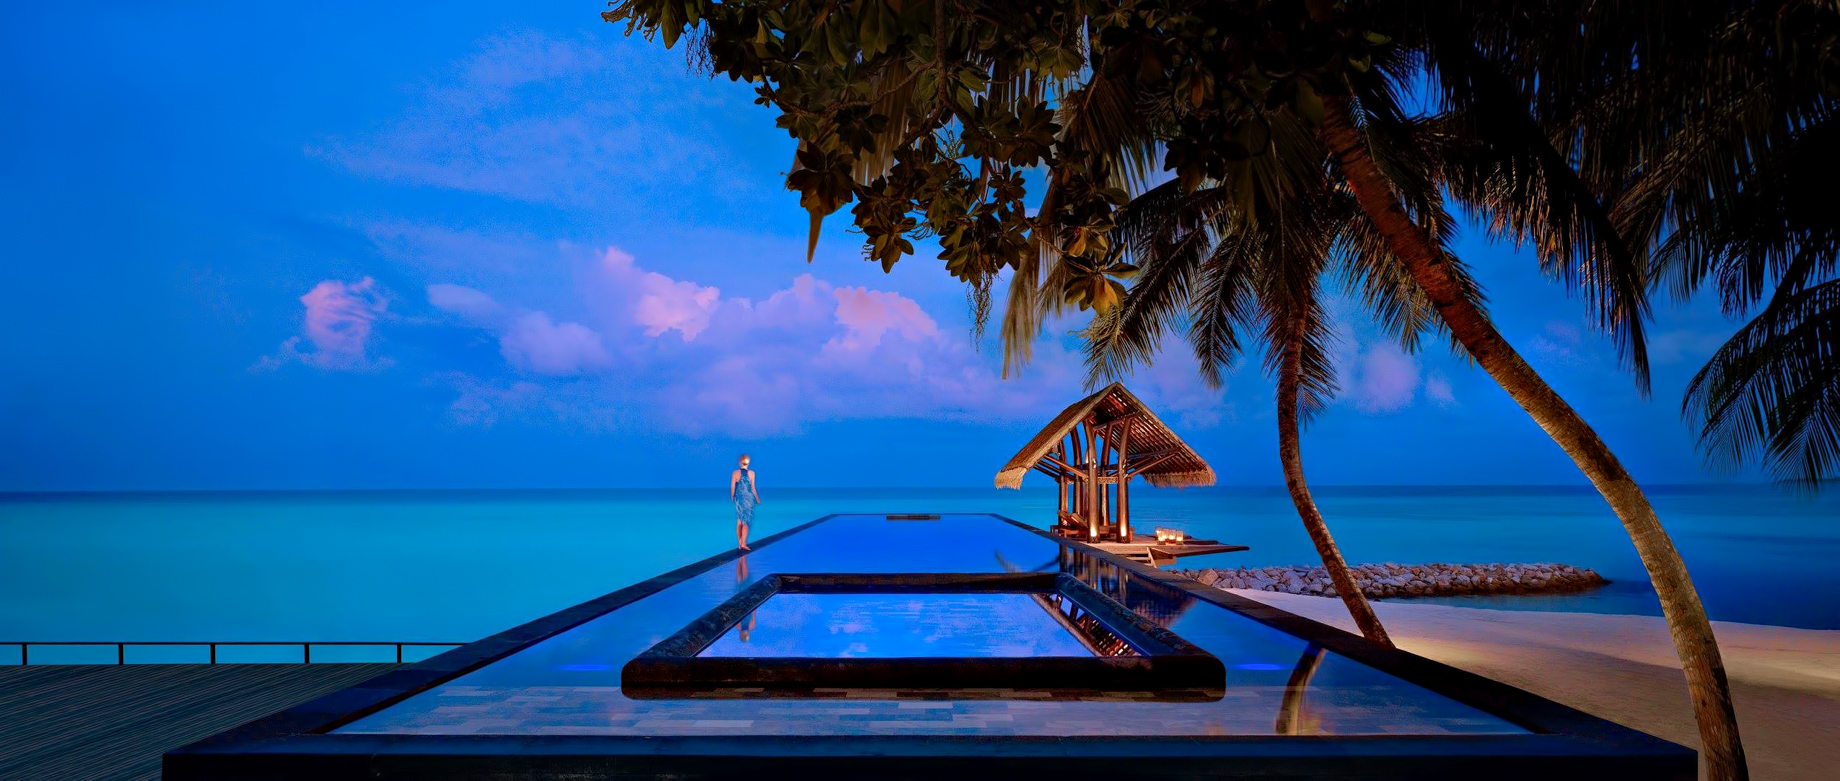 One&Only Reethi Rah Resort - North Male Atoll, Maldives - Beachfront Overwater Infinity Pool Sunset